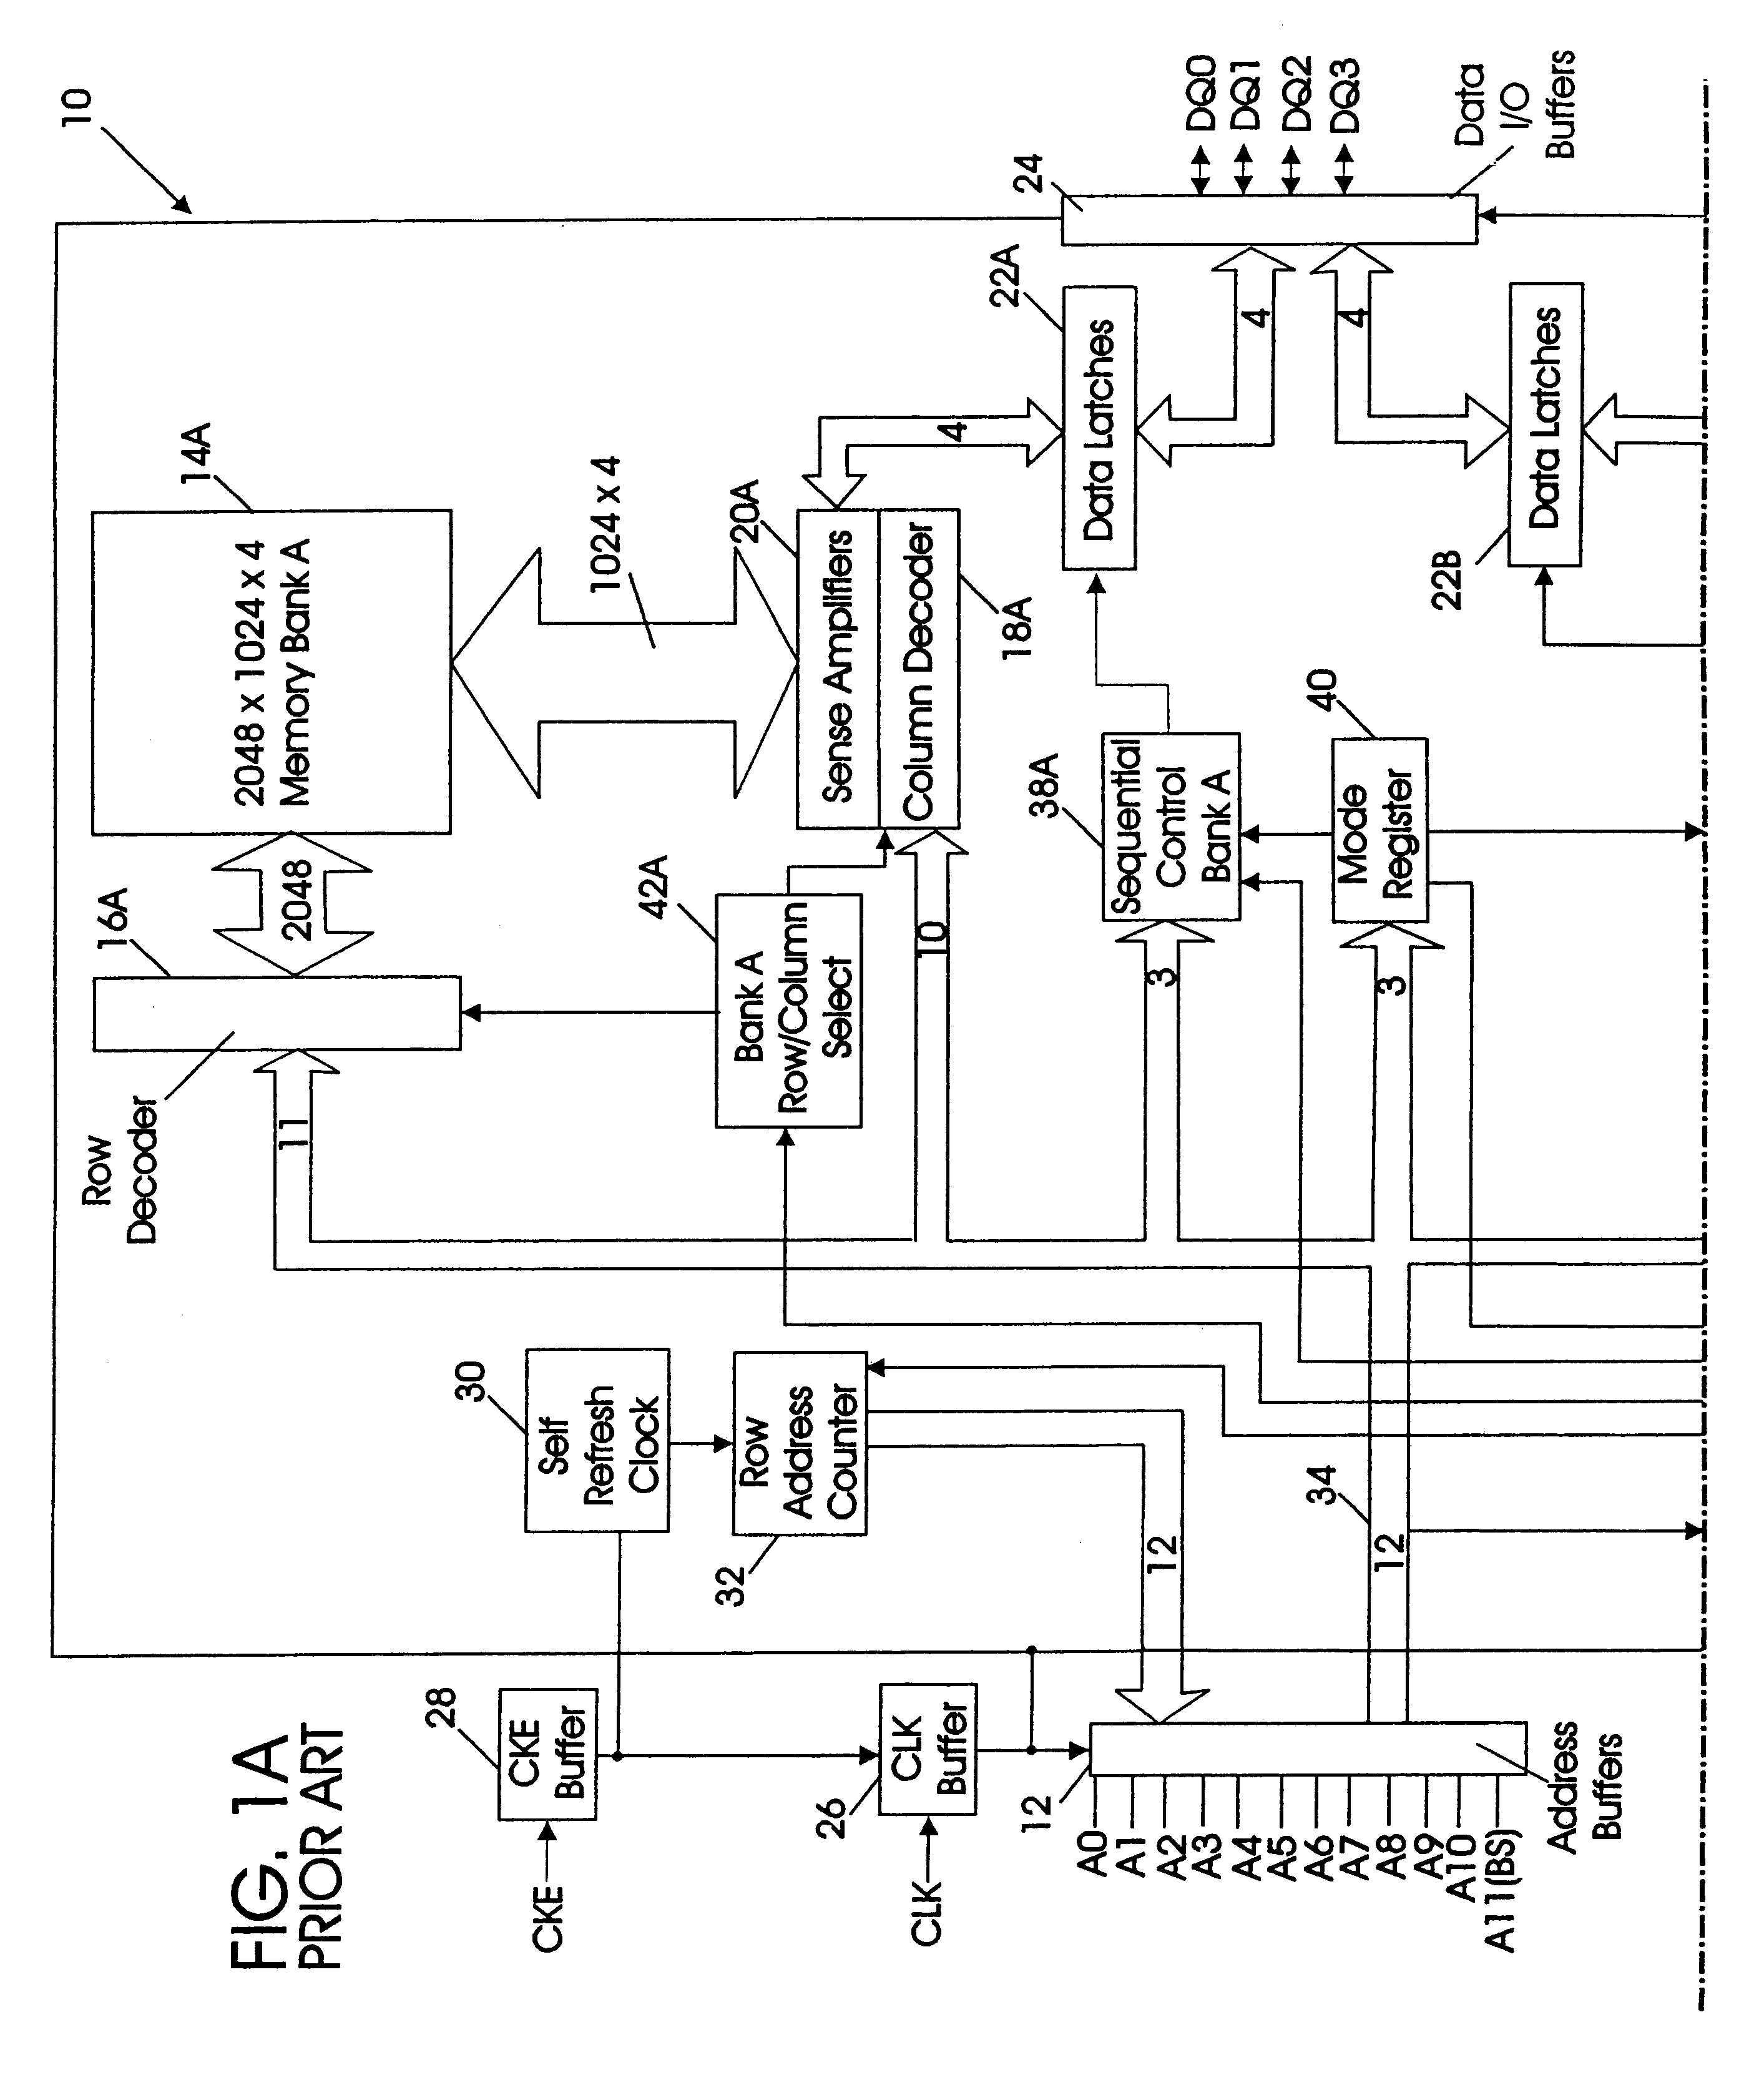 Cached synchronous DRAM architecture having a mode register programmable cache policy